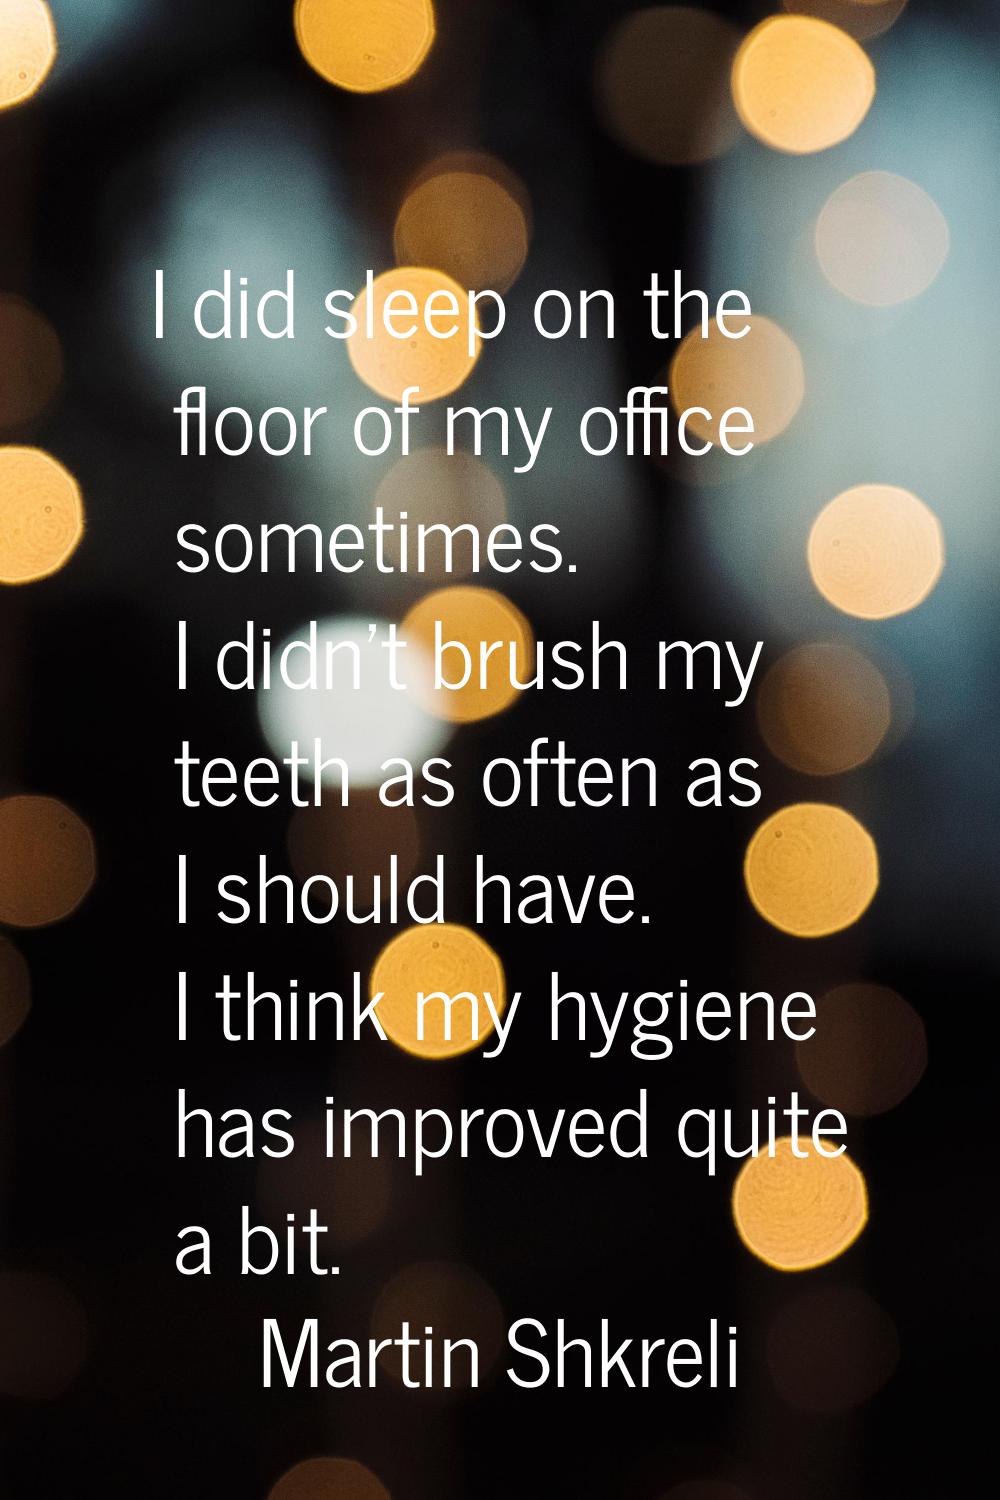 I did sleep on the floor of my office sometimes. I didn't brush my teeth as often as I should have.